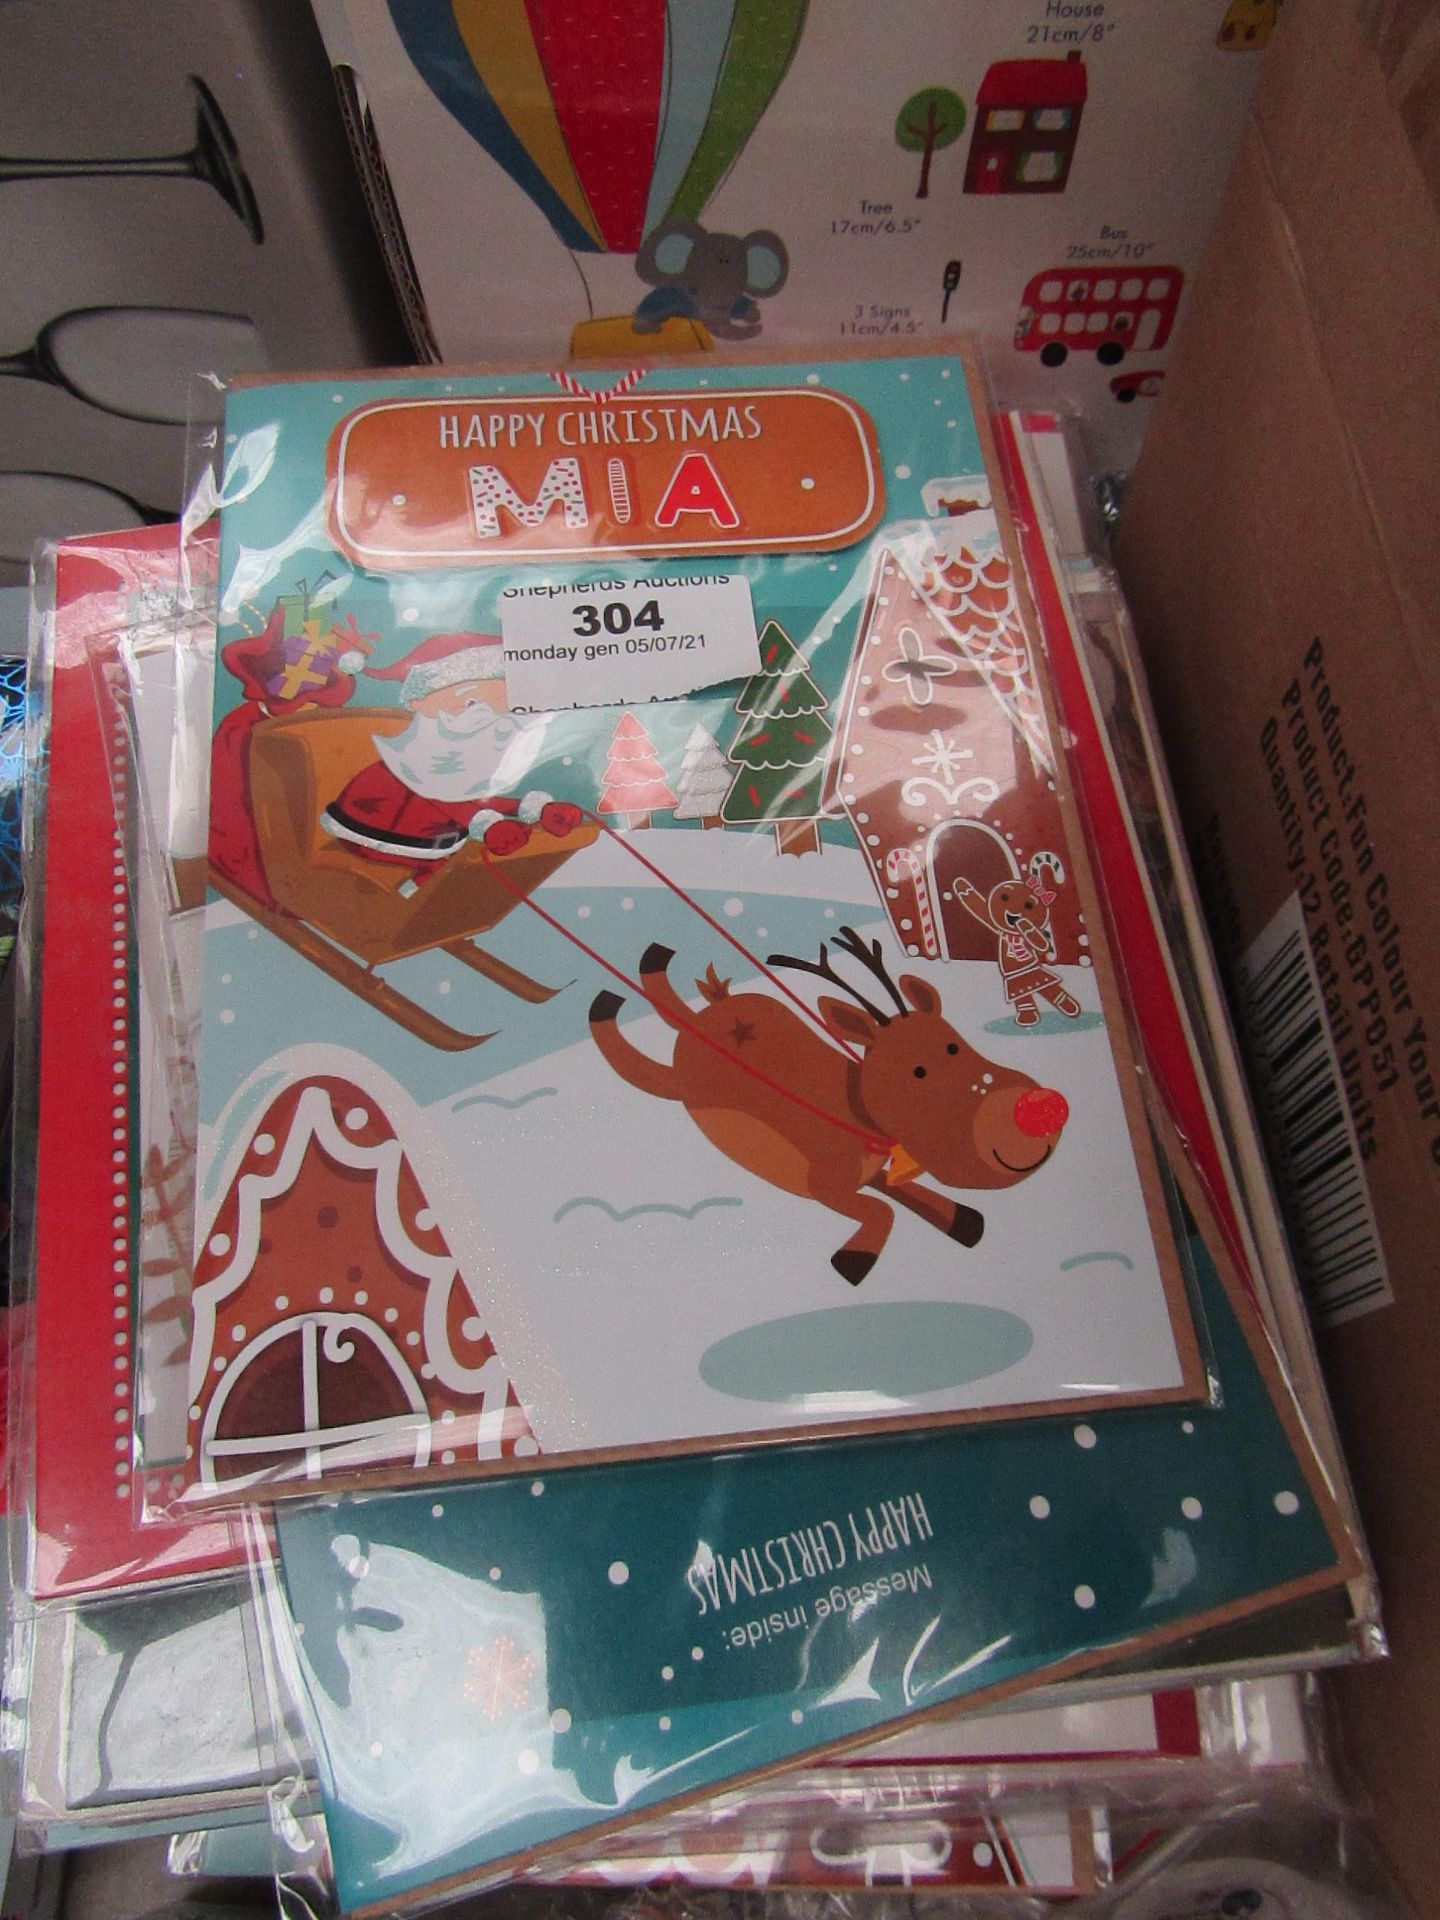 15x Various Assorted Packs of Christmas Cards - All Different Sized. - Packaged.